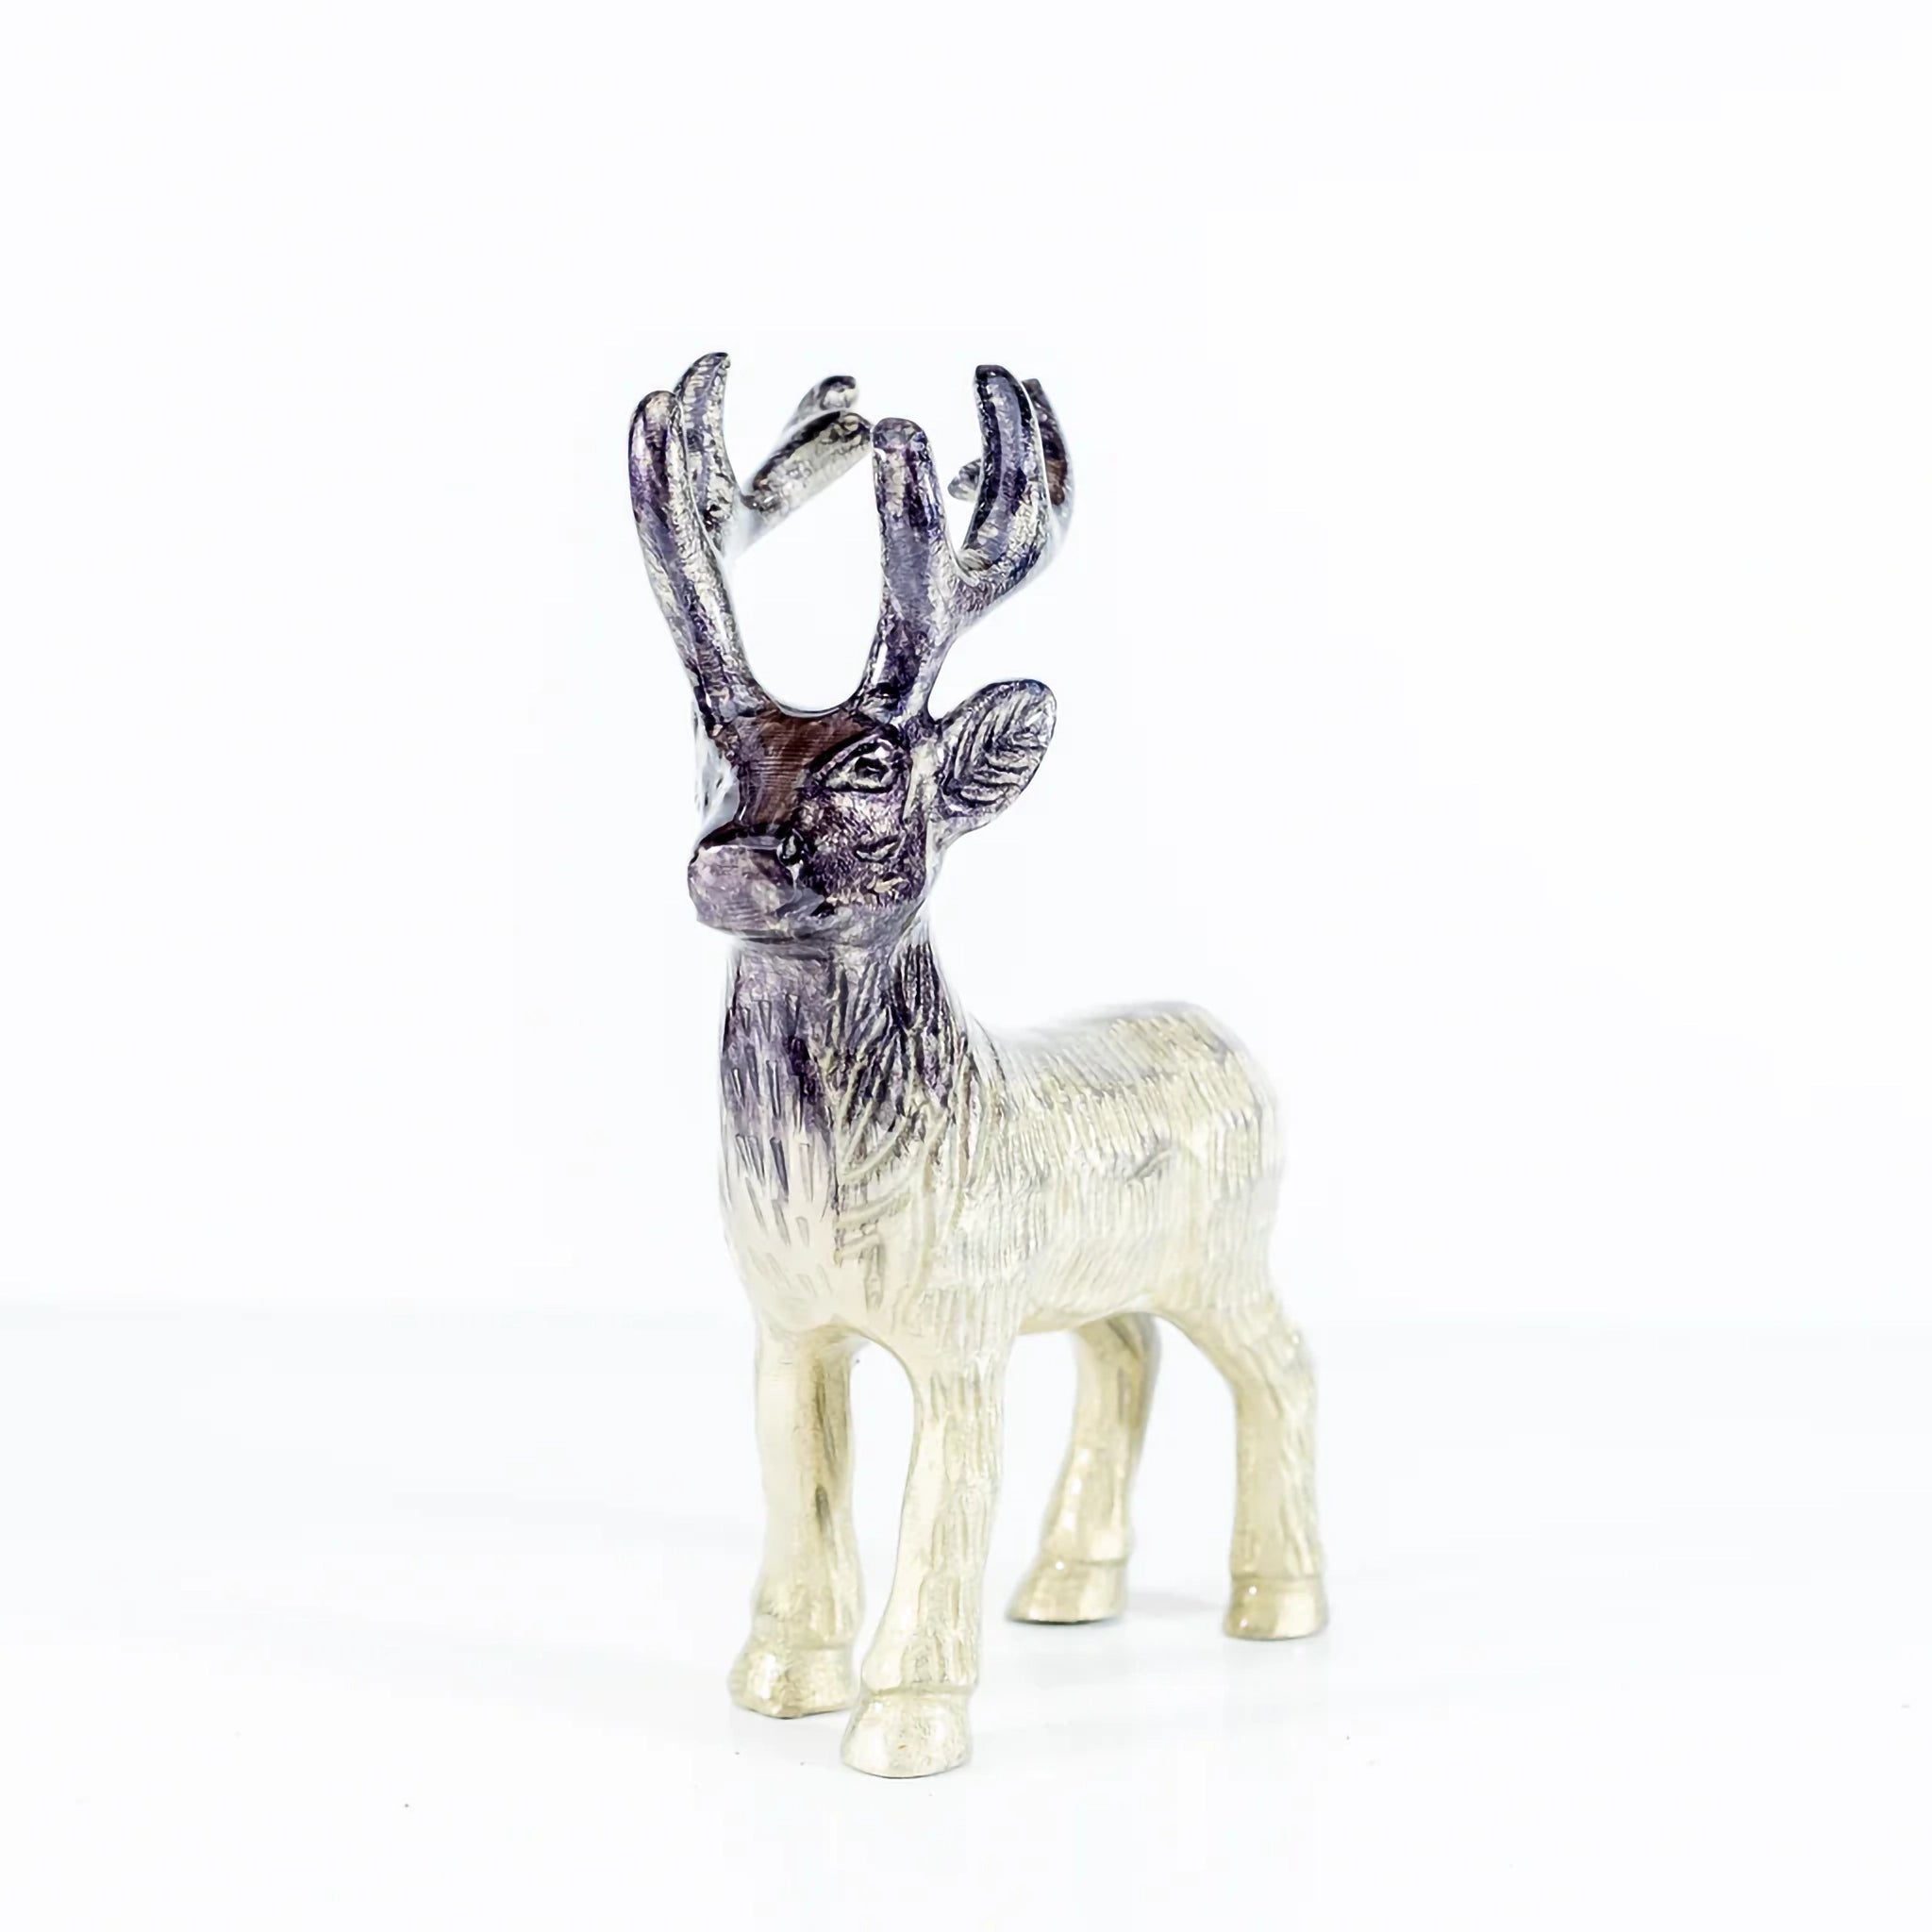 Face view of brushed silver coloured Highland stag sculpture with etched details